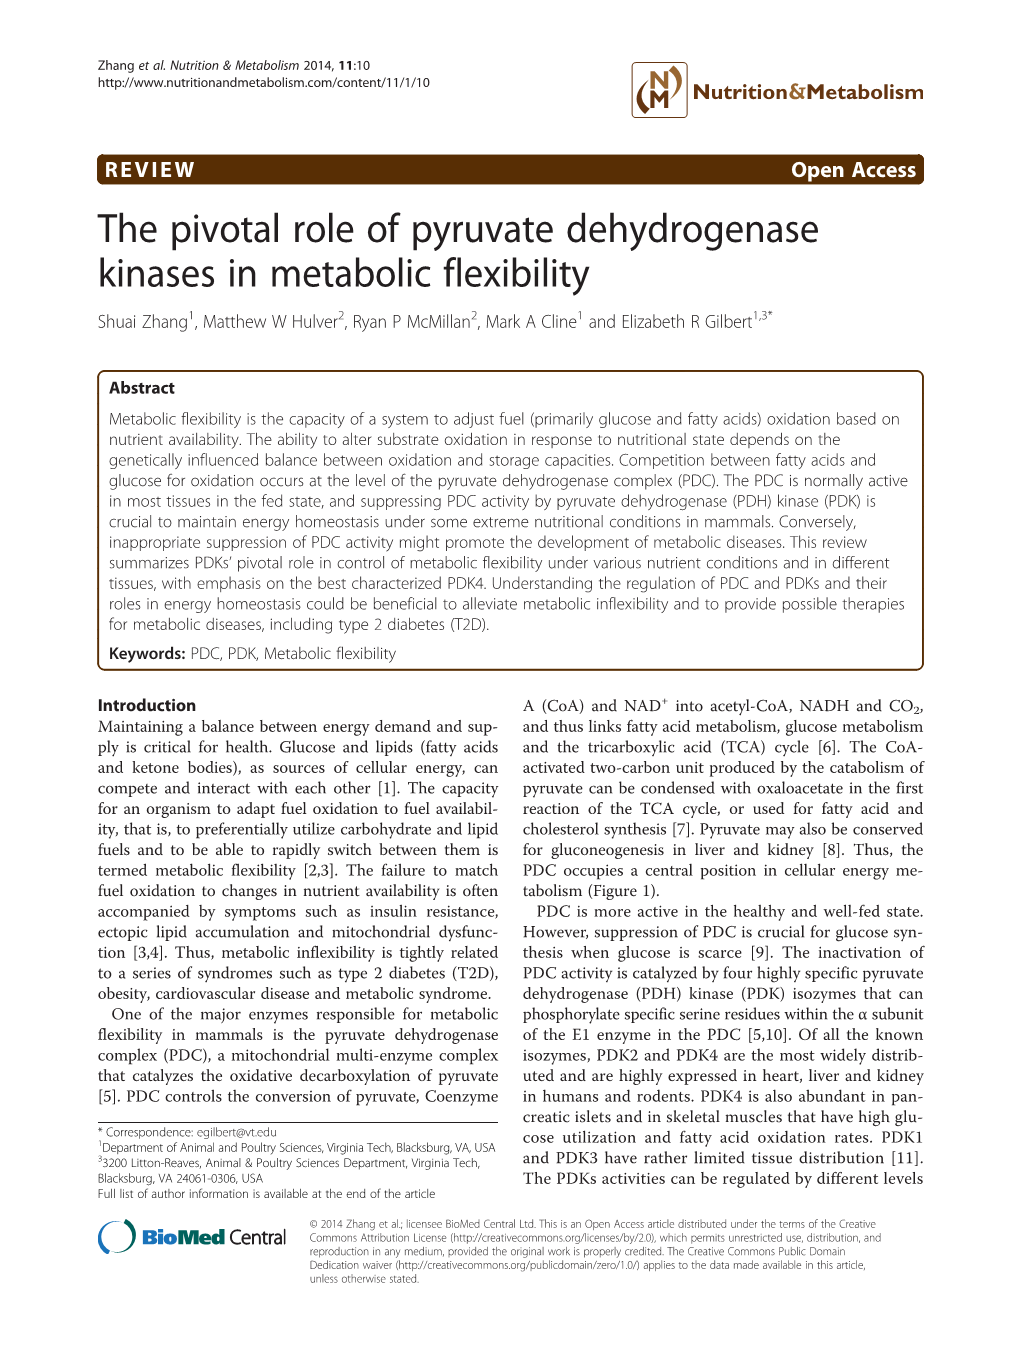 The Pivotal Role of Pyruvate Dehydrogenase Kinases In